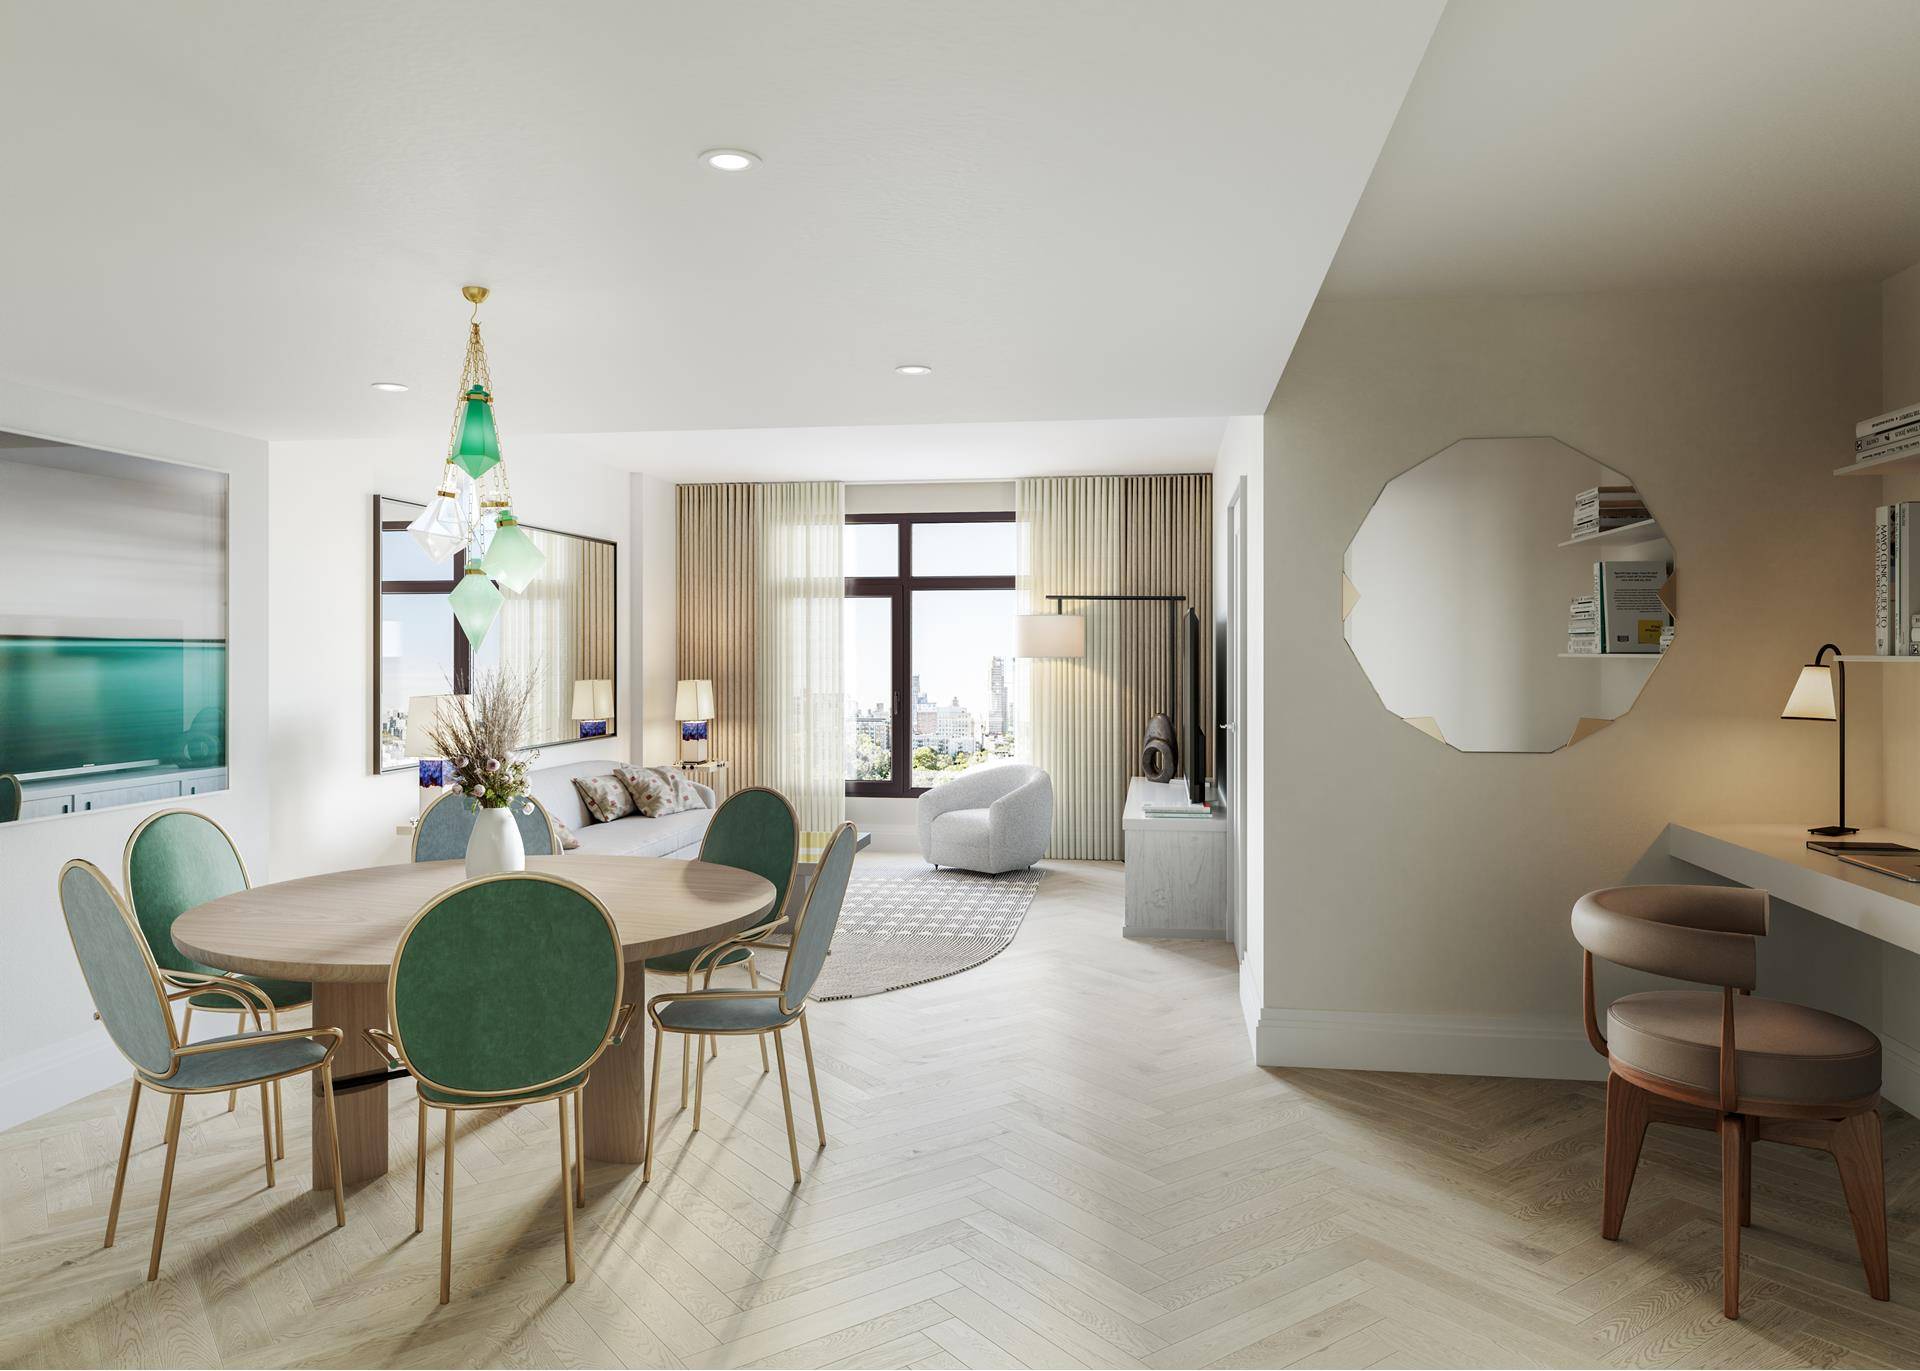 Sales Gallery Now Open By Appointment Introducing residence 5E at 300 West, an east facing studio offering an open concept living area that boasts custom White Oak herringbone flooring, central ...